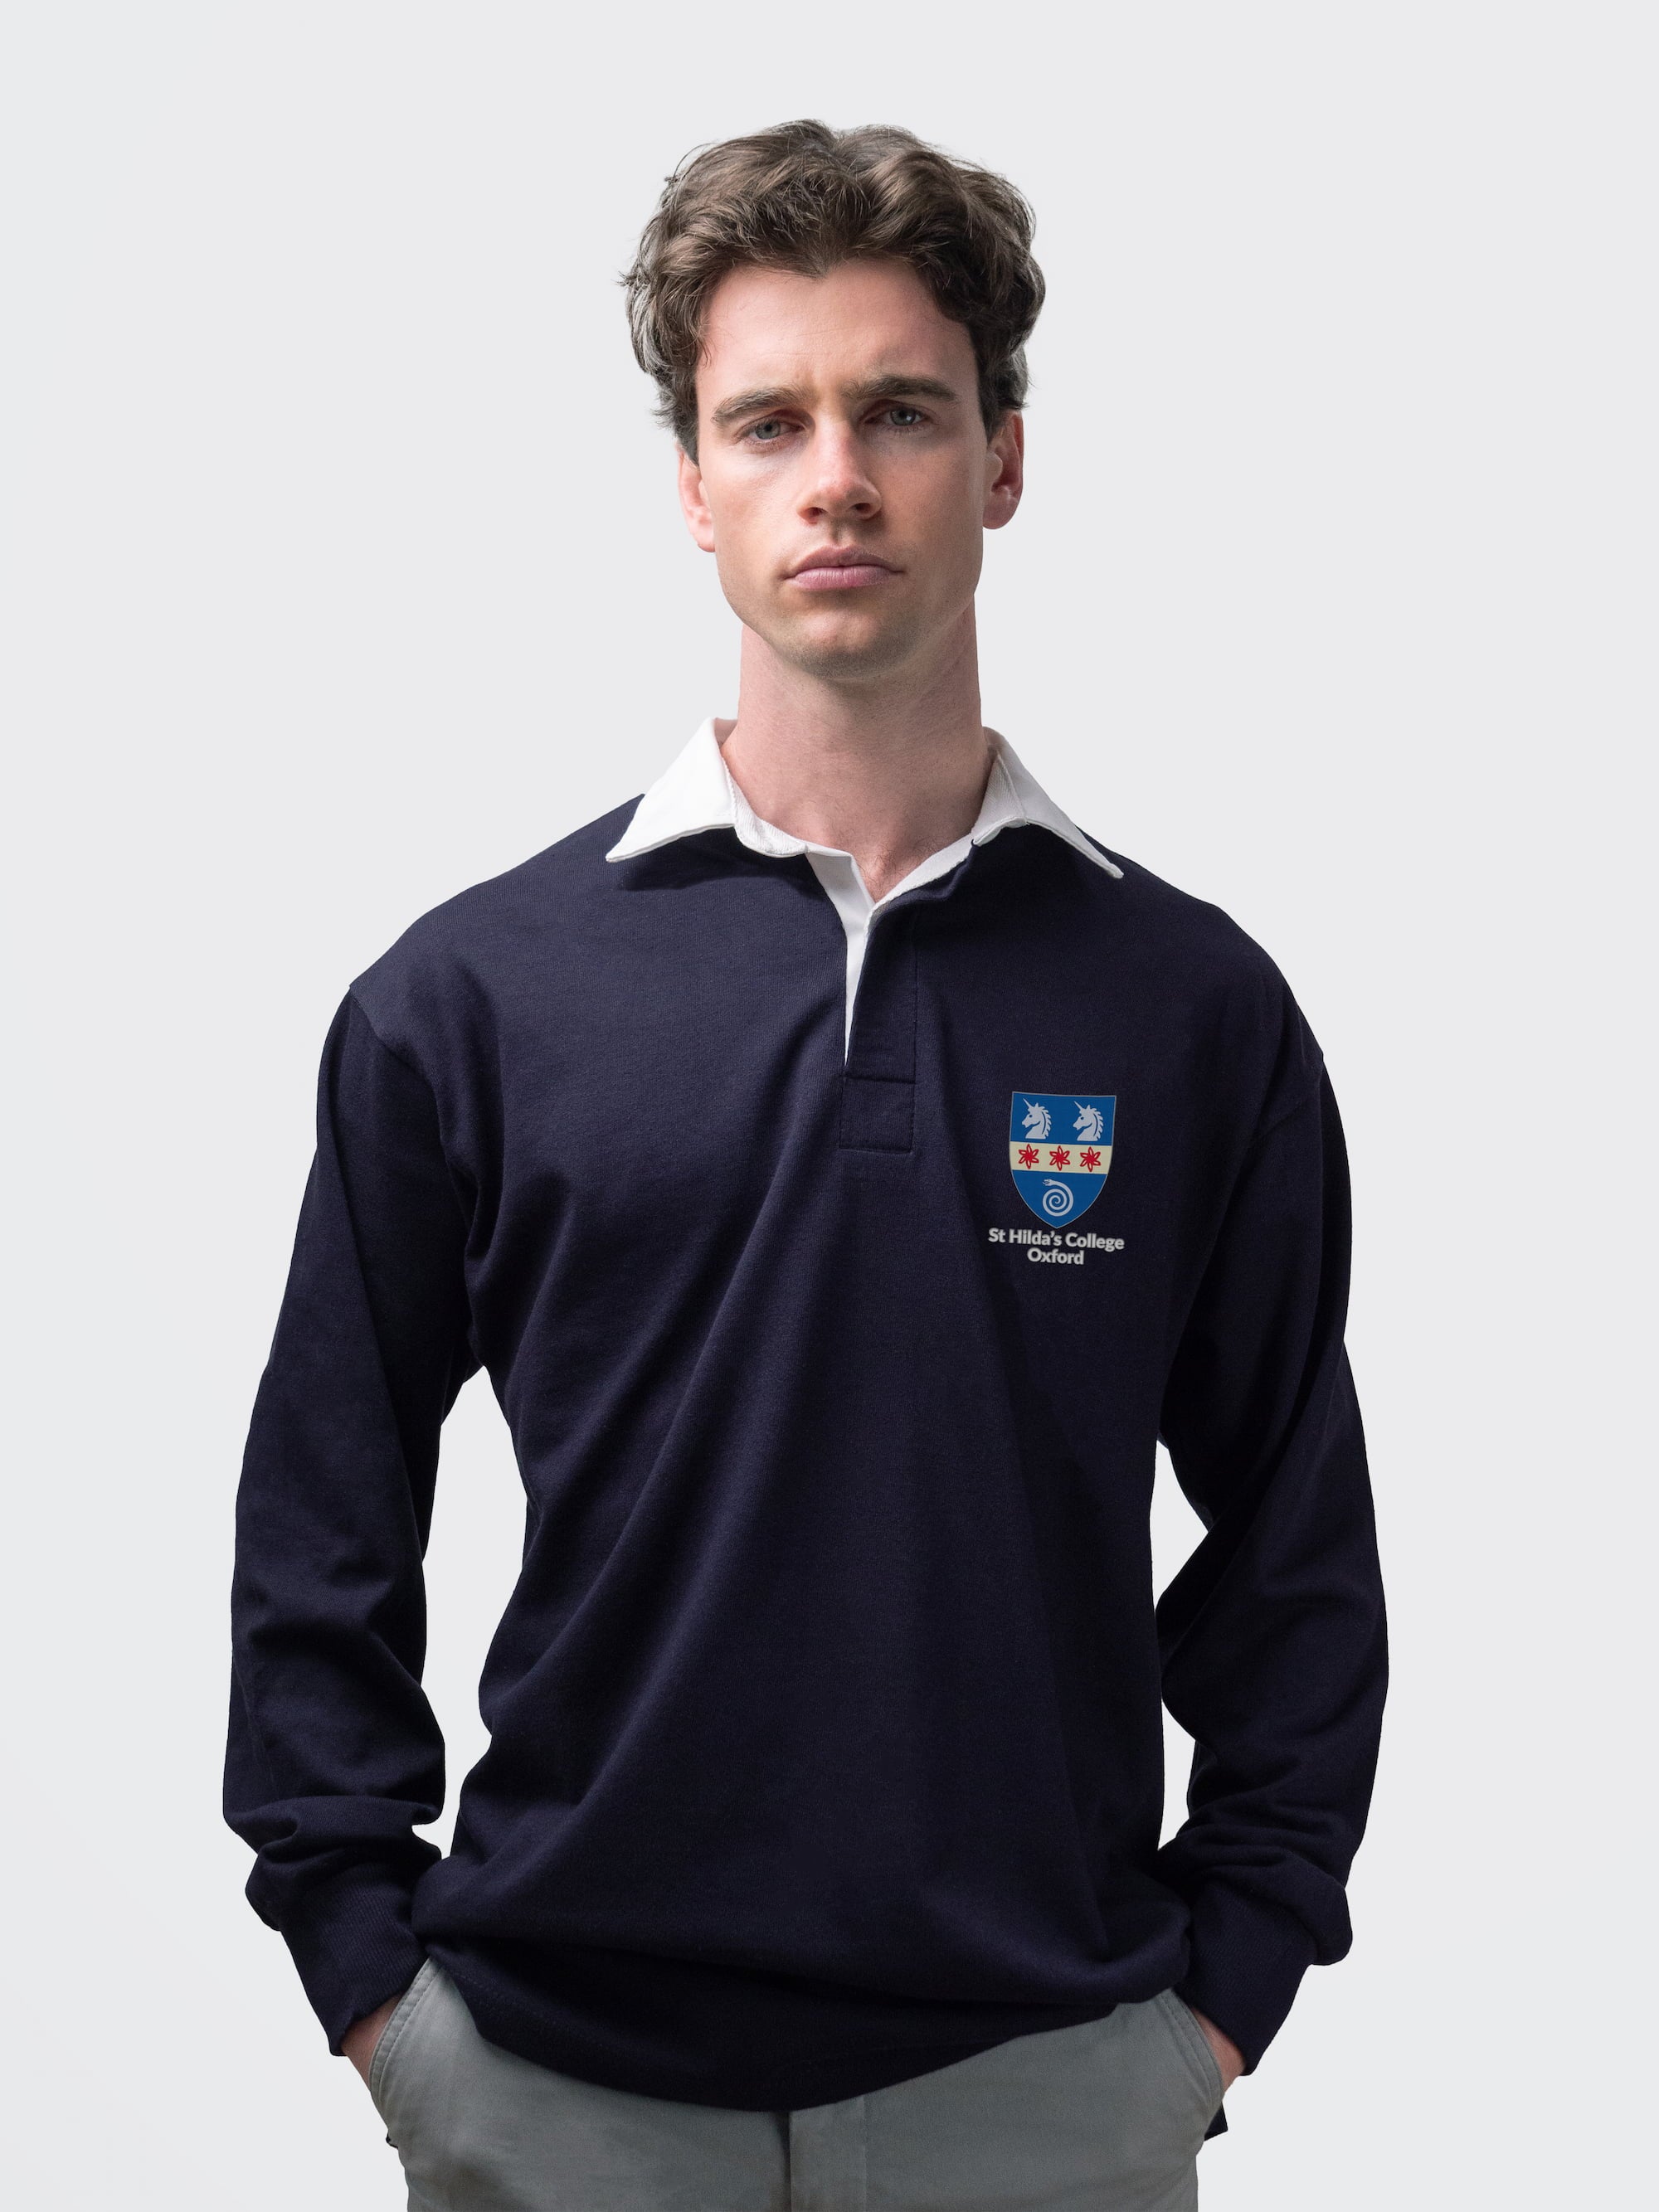 St Hilda's College student wearing an embroidered mens rugby shirt in navy